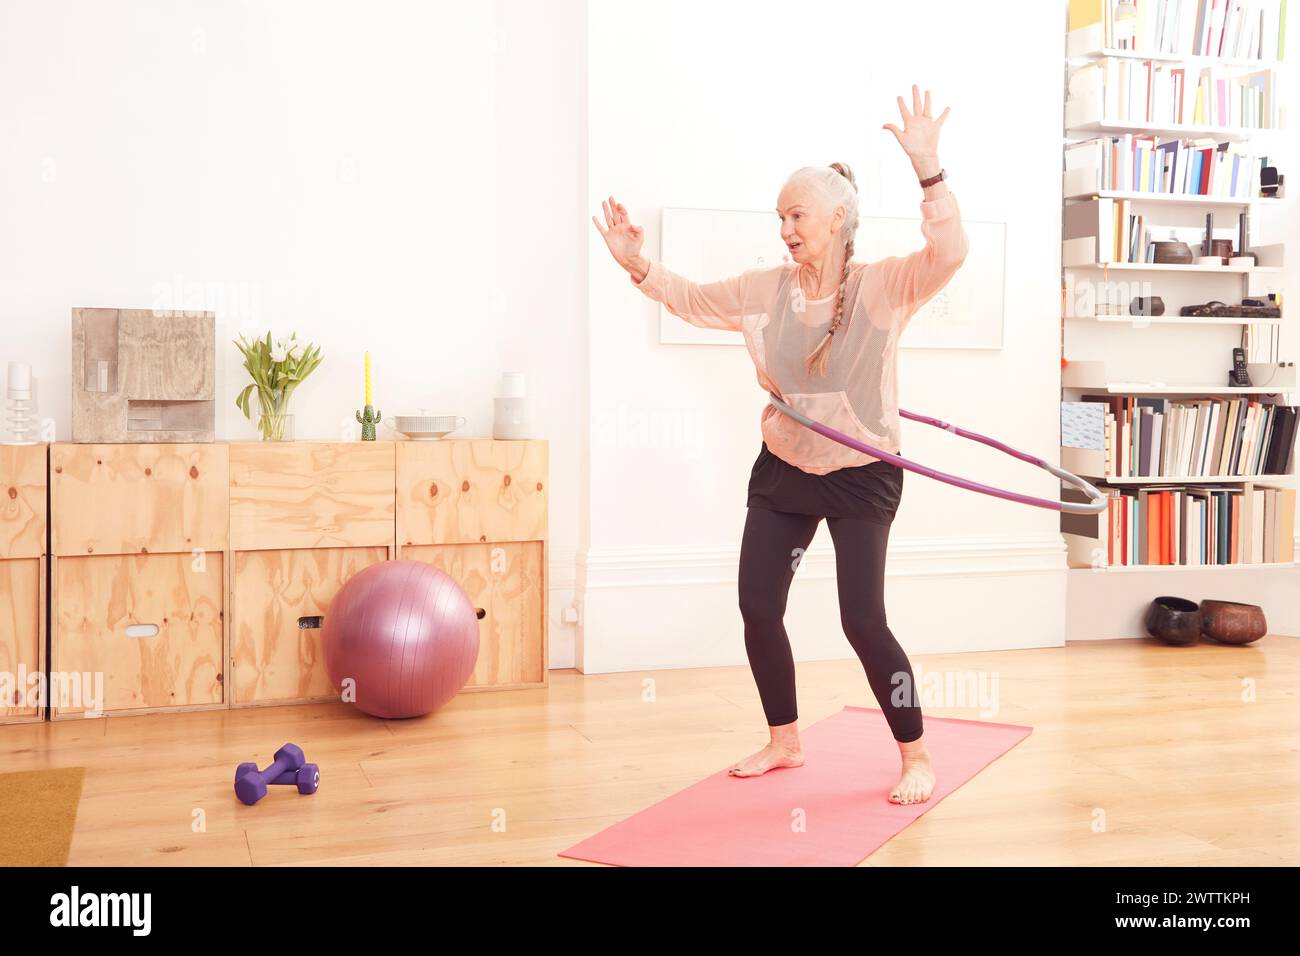 Elderly woman exercising with a hula hoop indoors Stock Photo